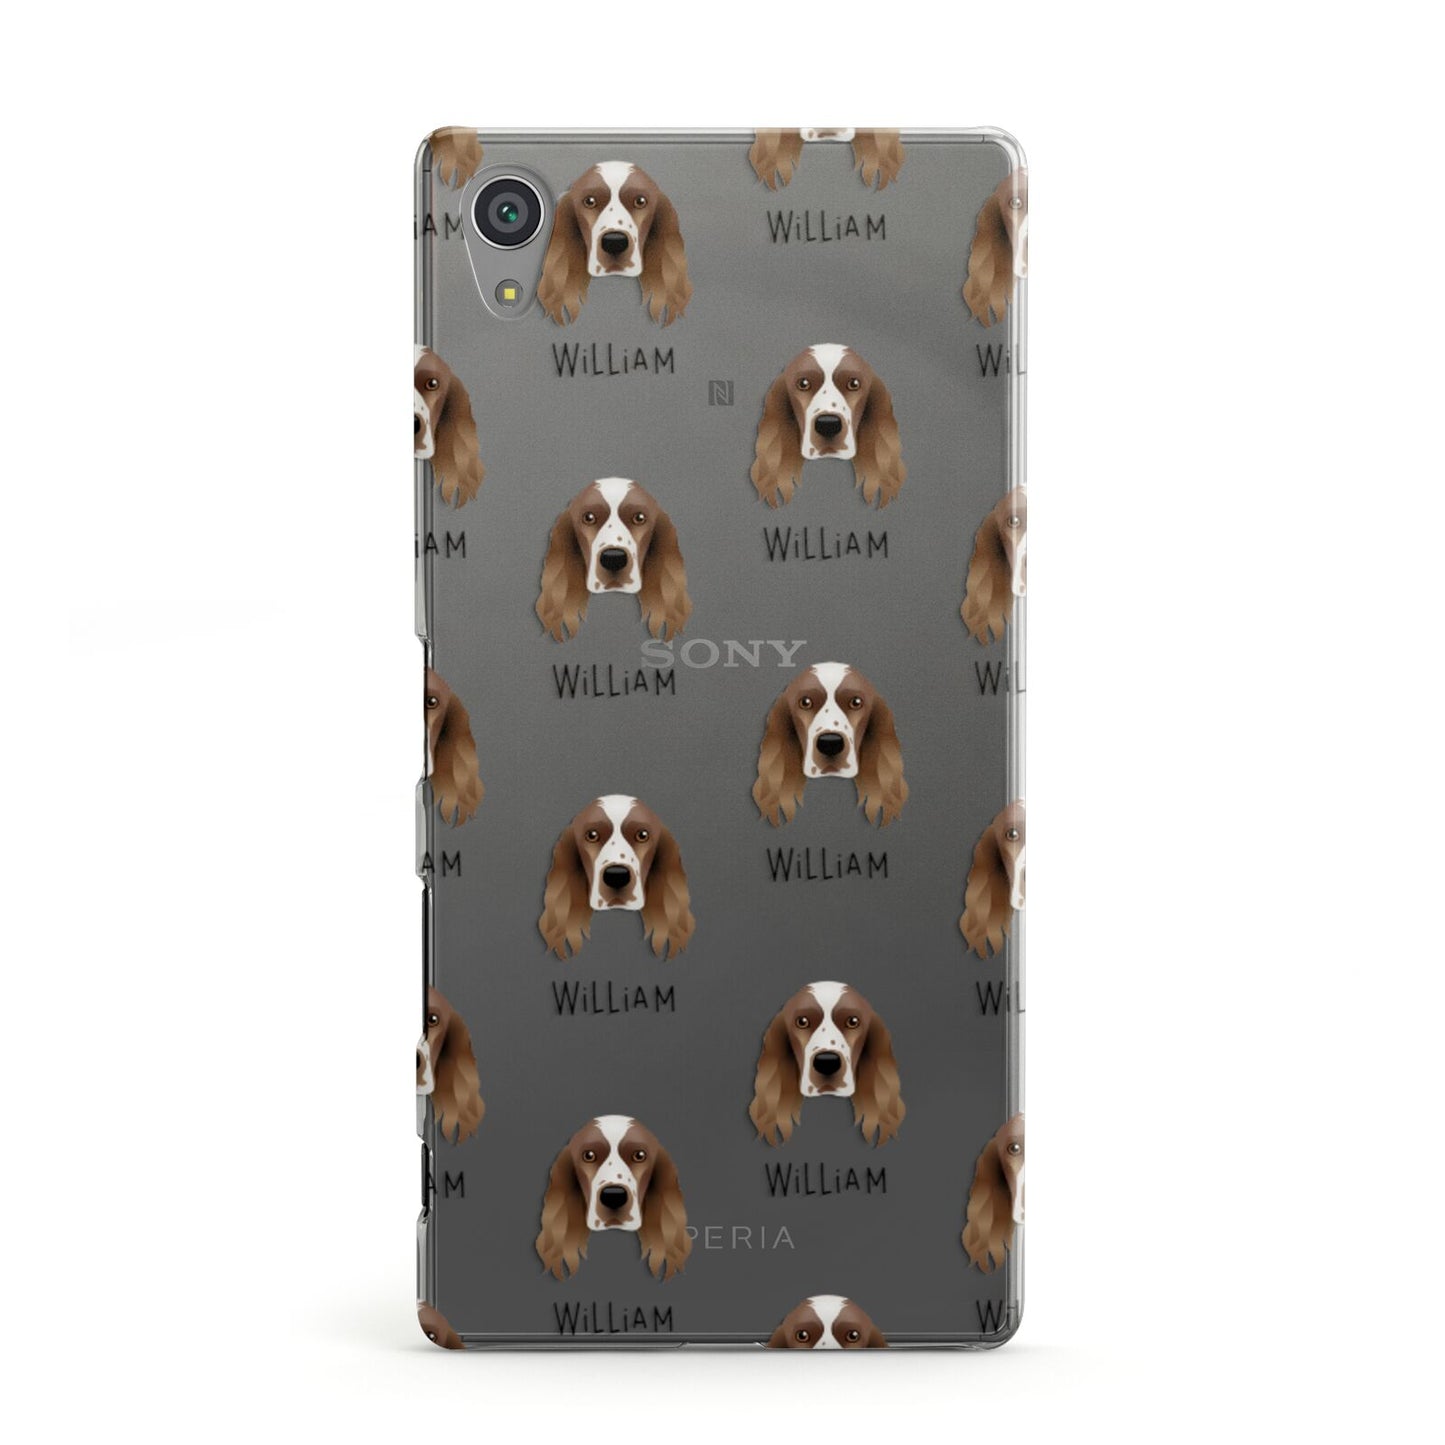 Welsh Springer Spaniel Icon with Name Sony Xperia Case